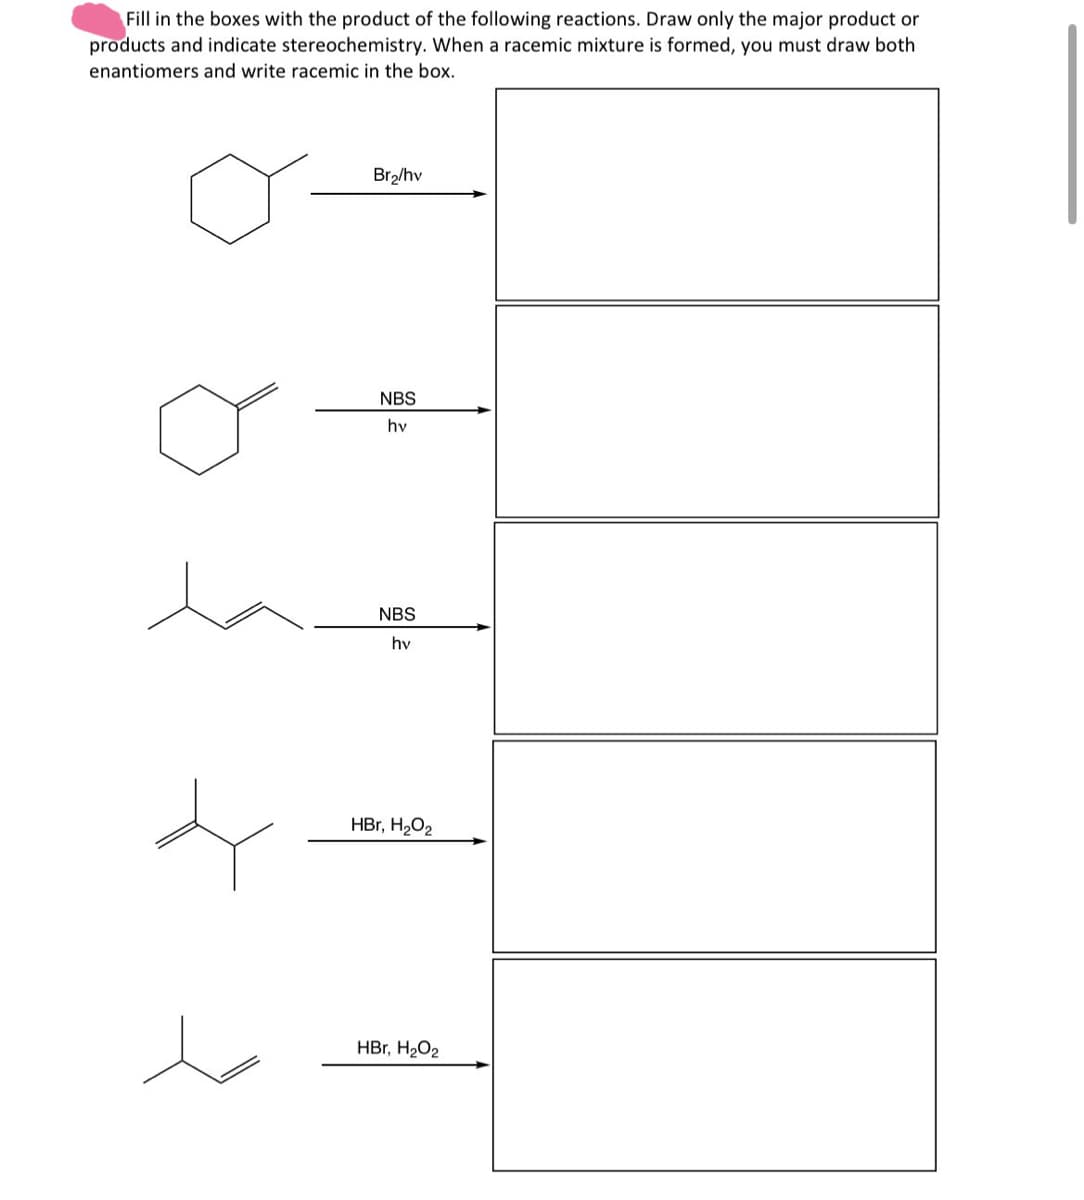 Fill in the boxes with the product of the following reactions. Draw only the major product or
products and indicate stereochemistry. When a racemic mixture is formed, you must draw both
enantiomers and write racemic in the box.
Br₂/hv
NBS
hv
NBS
hv
HBr, H₂O2
HBr, H₂O2